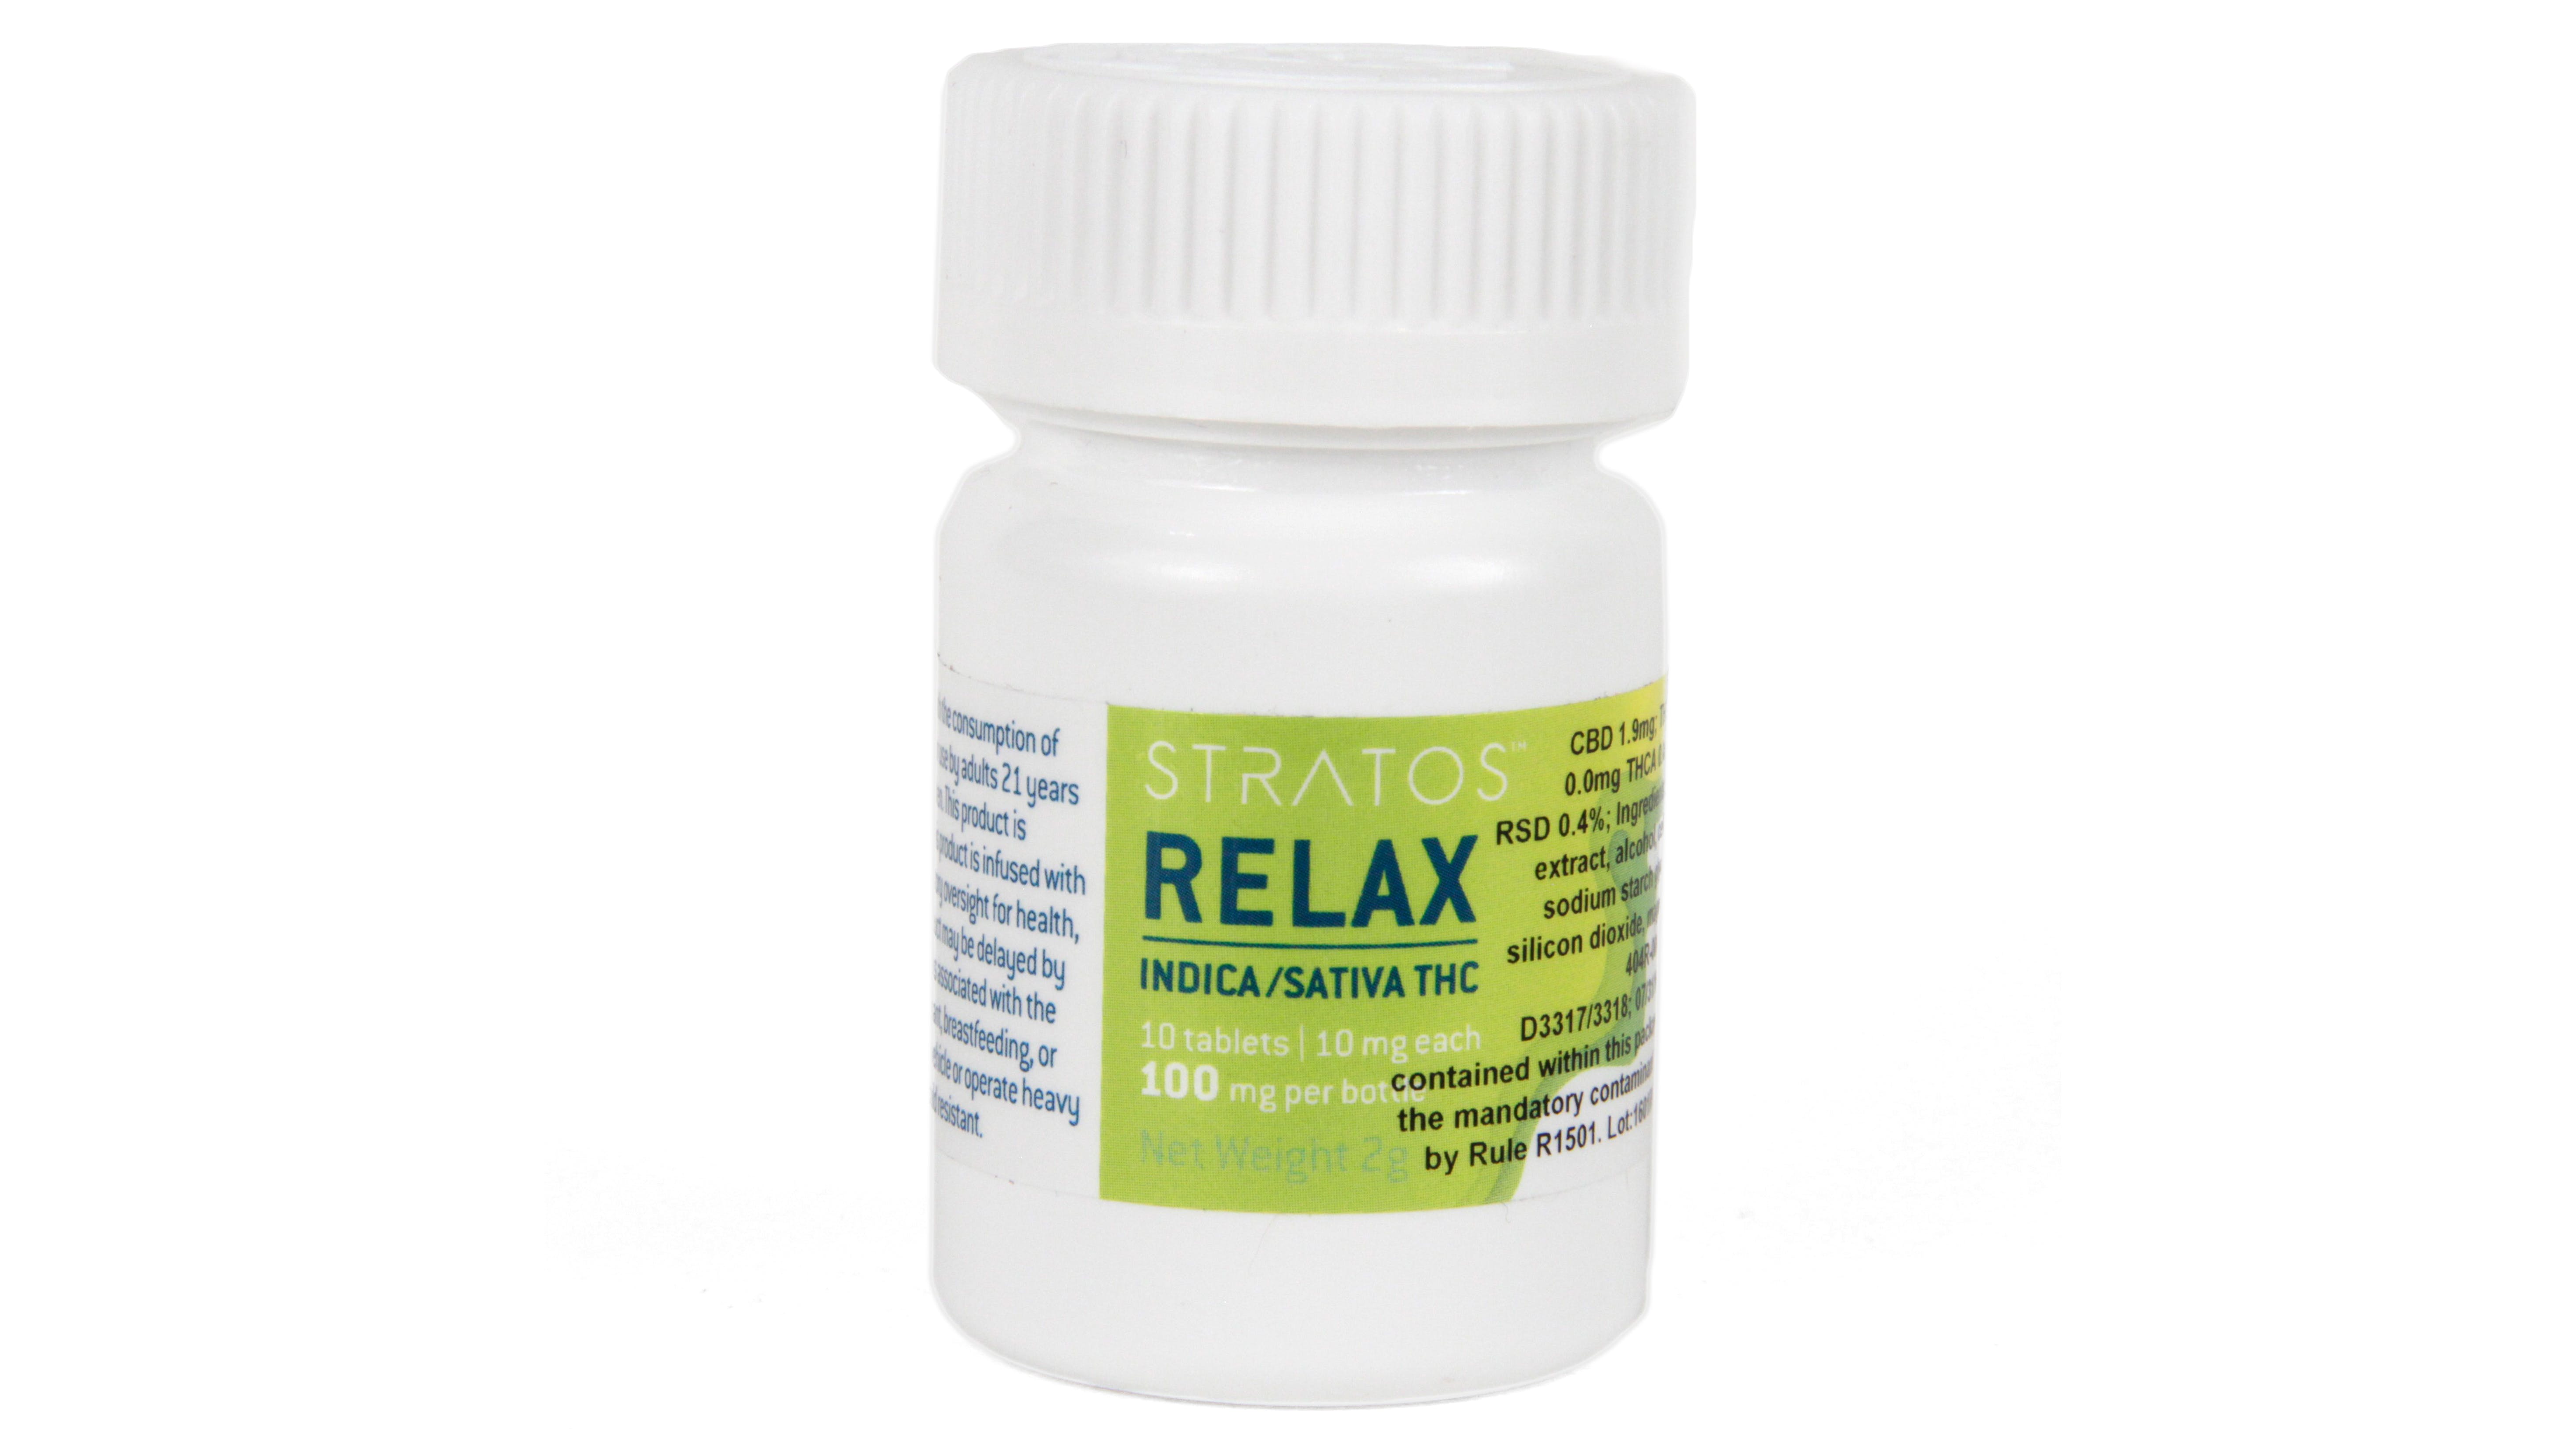 edible-stratos-relax-tablets-100mg-hybrid